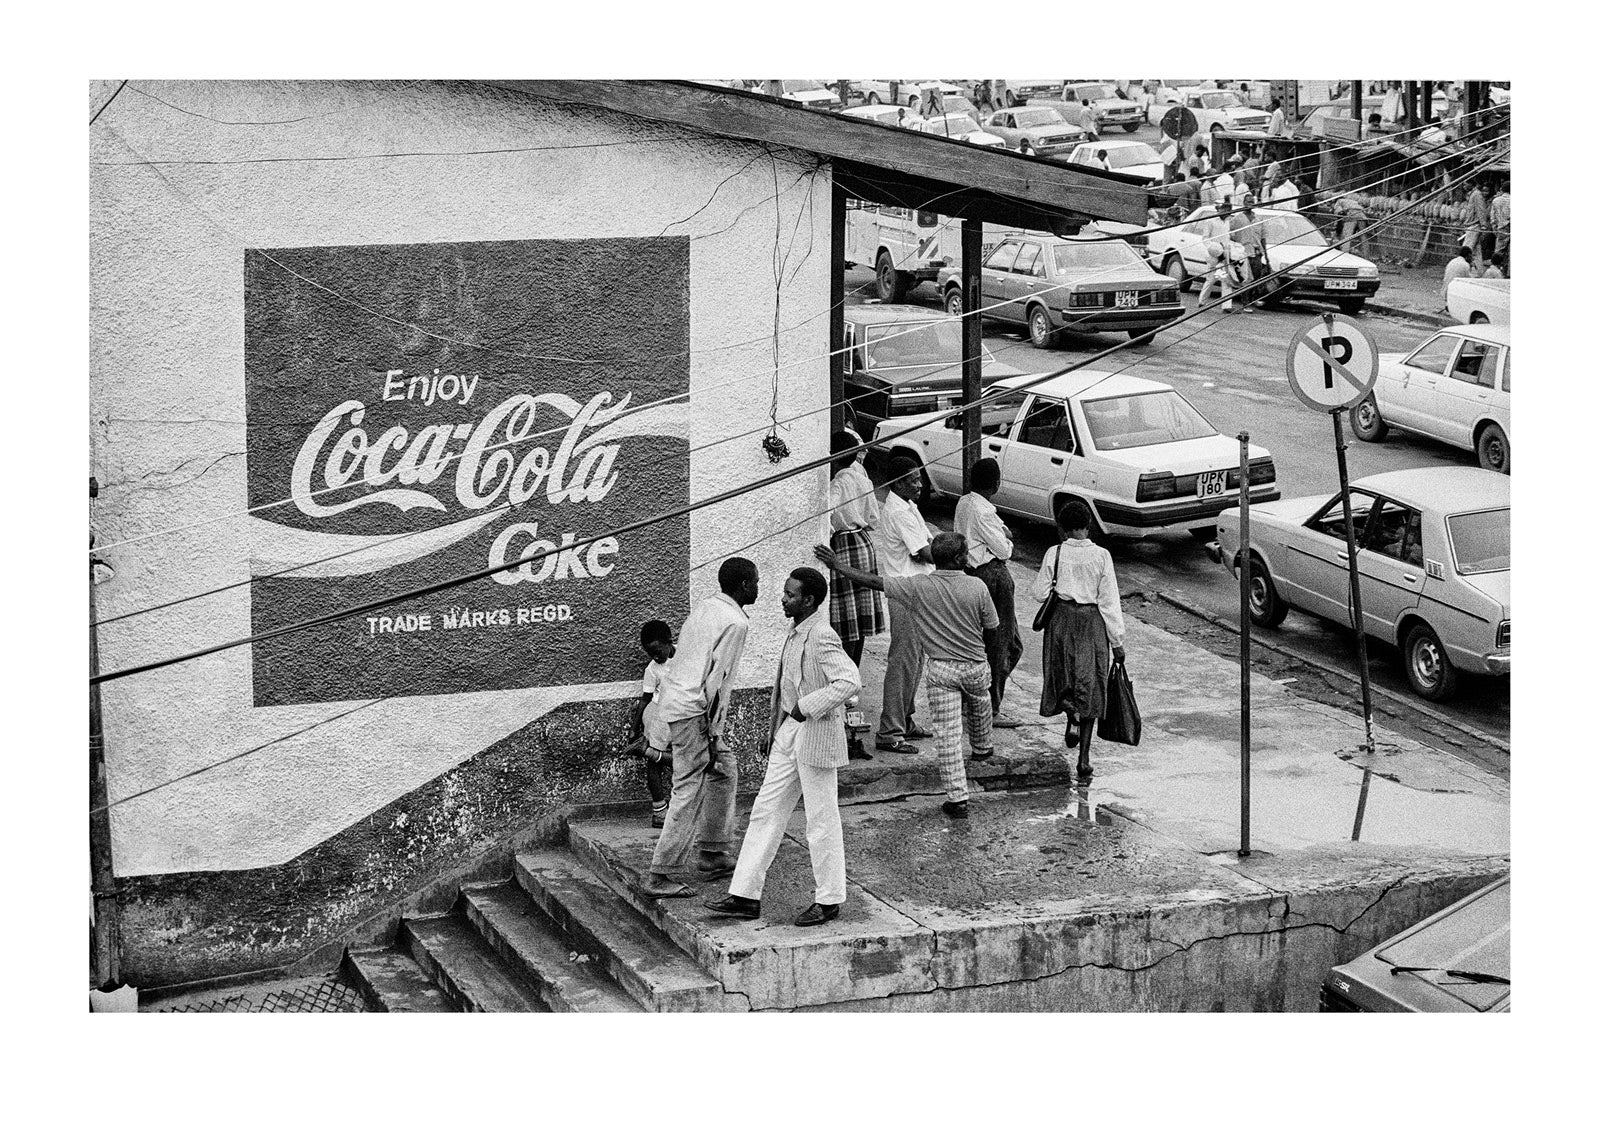 People gather on a busy street corner beneath a Coca Cola sign in downtown Kampala. Captured on Ilford HP5 black and white negative film. Kampala, Western Uganda.